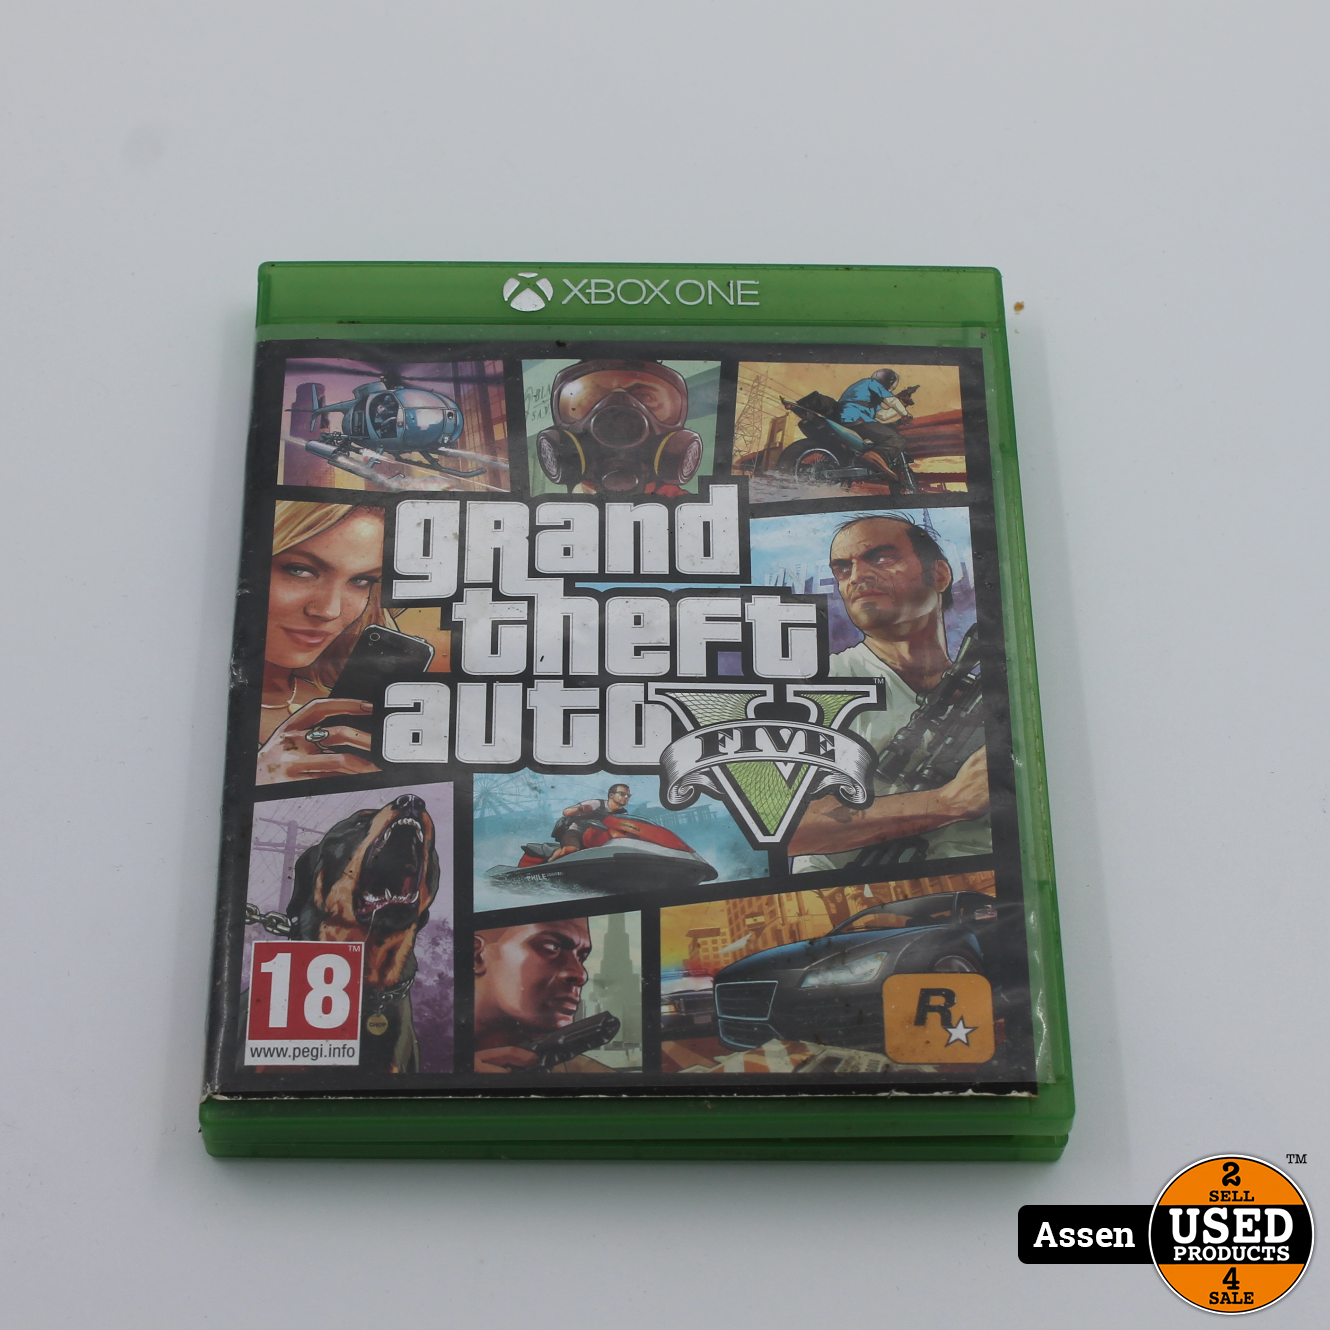 zuur Incident, evenement herhaling Grand Theft Auto V Xbox One Game - Used Products Assen